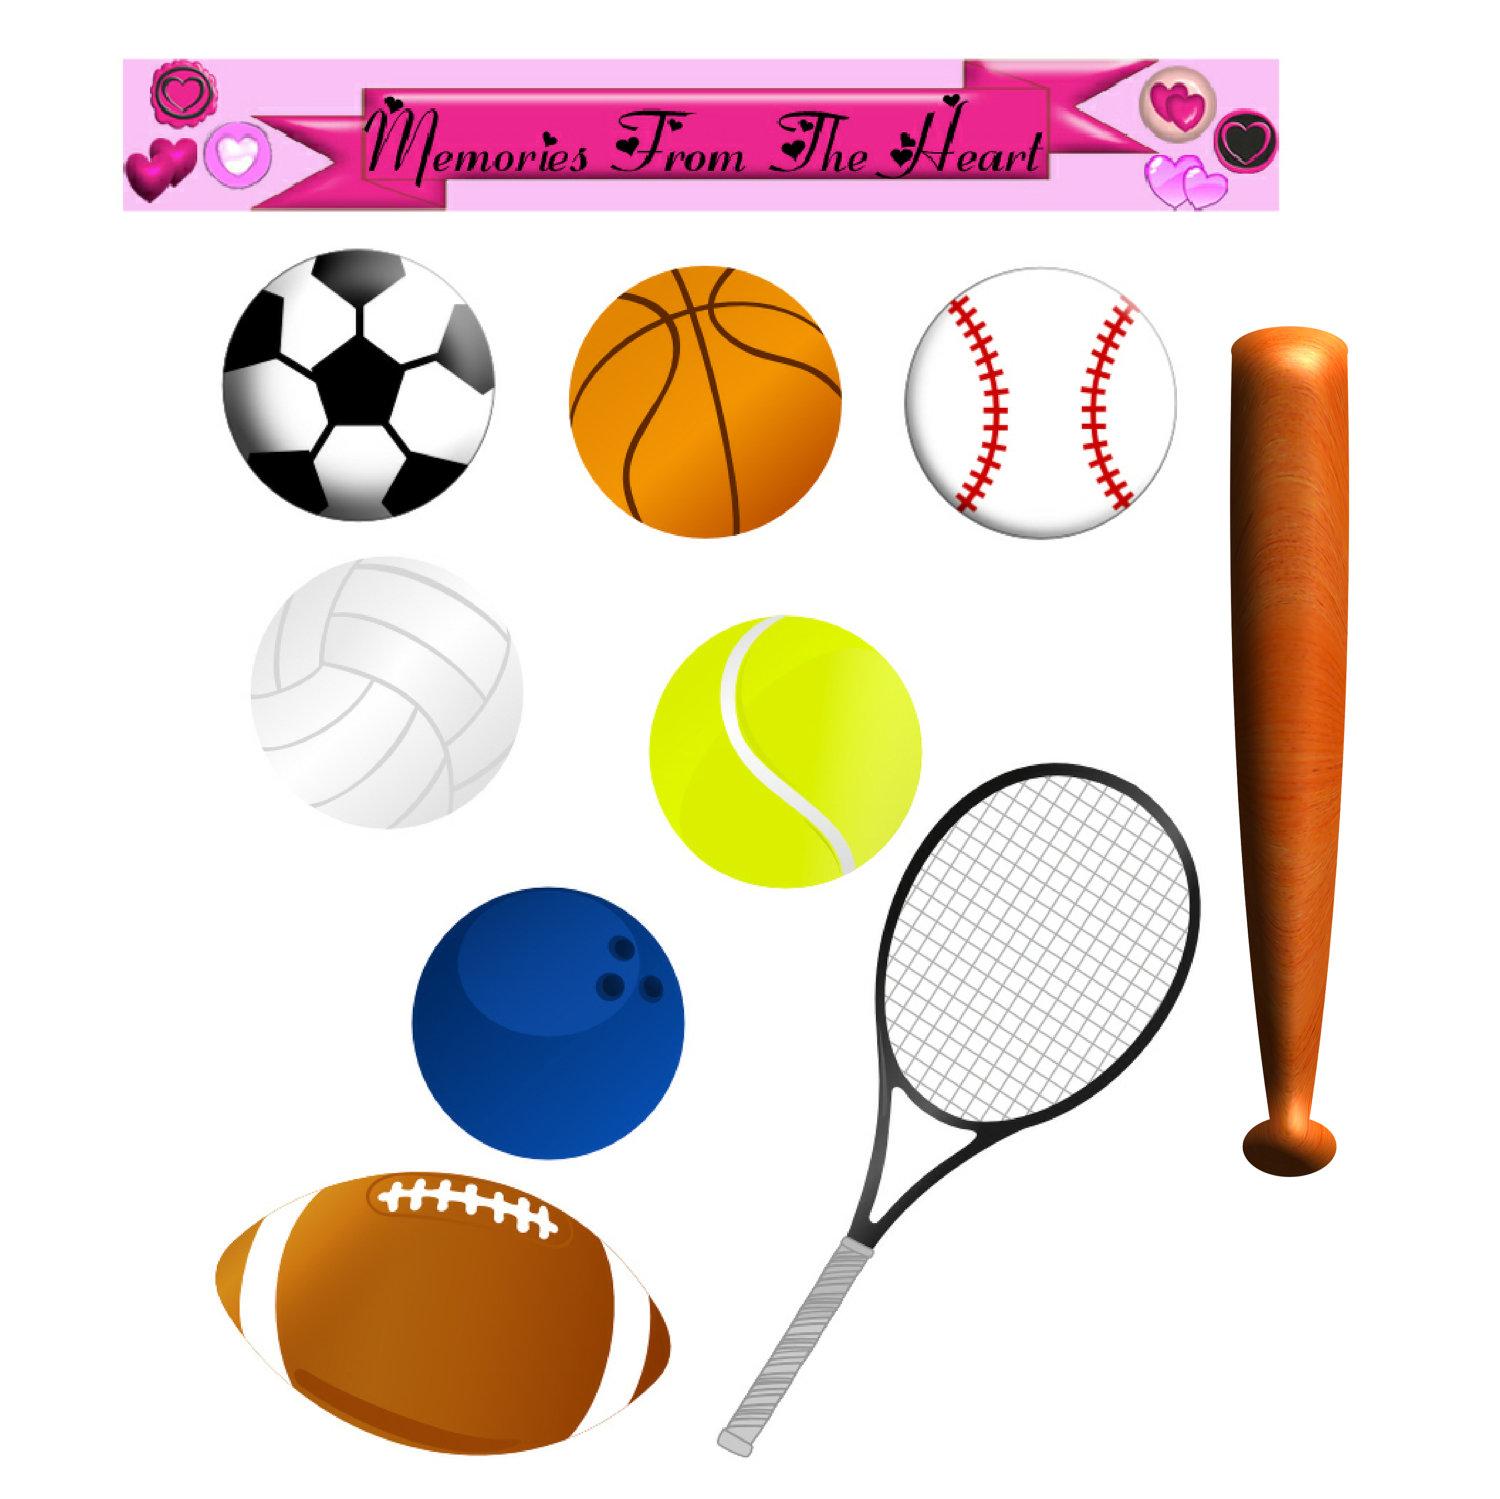 Free Picture Of Sports Equipment Download Free Picture Of Sports